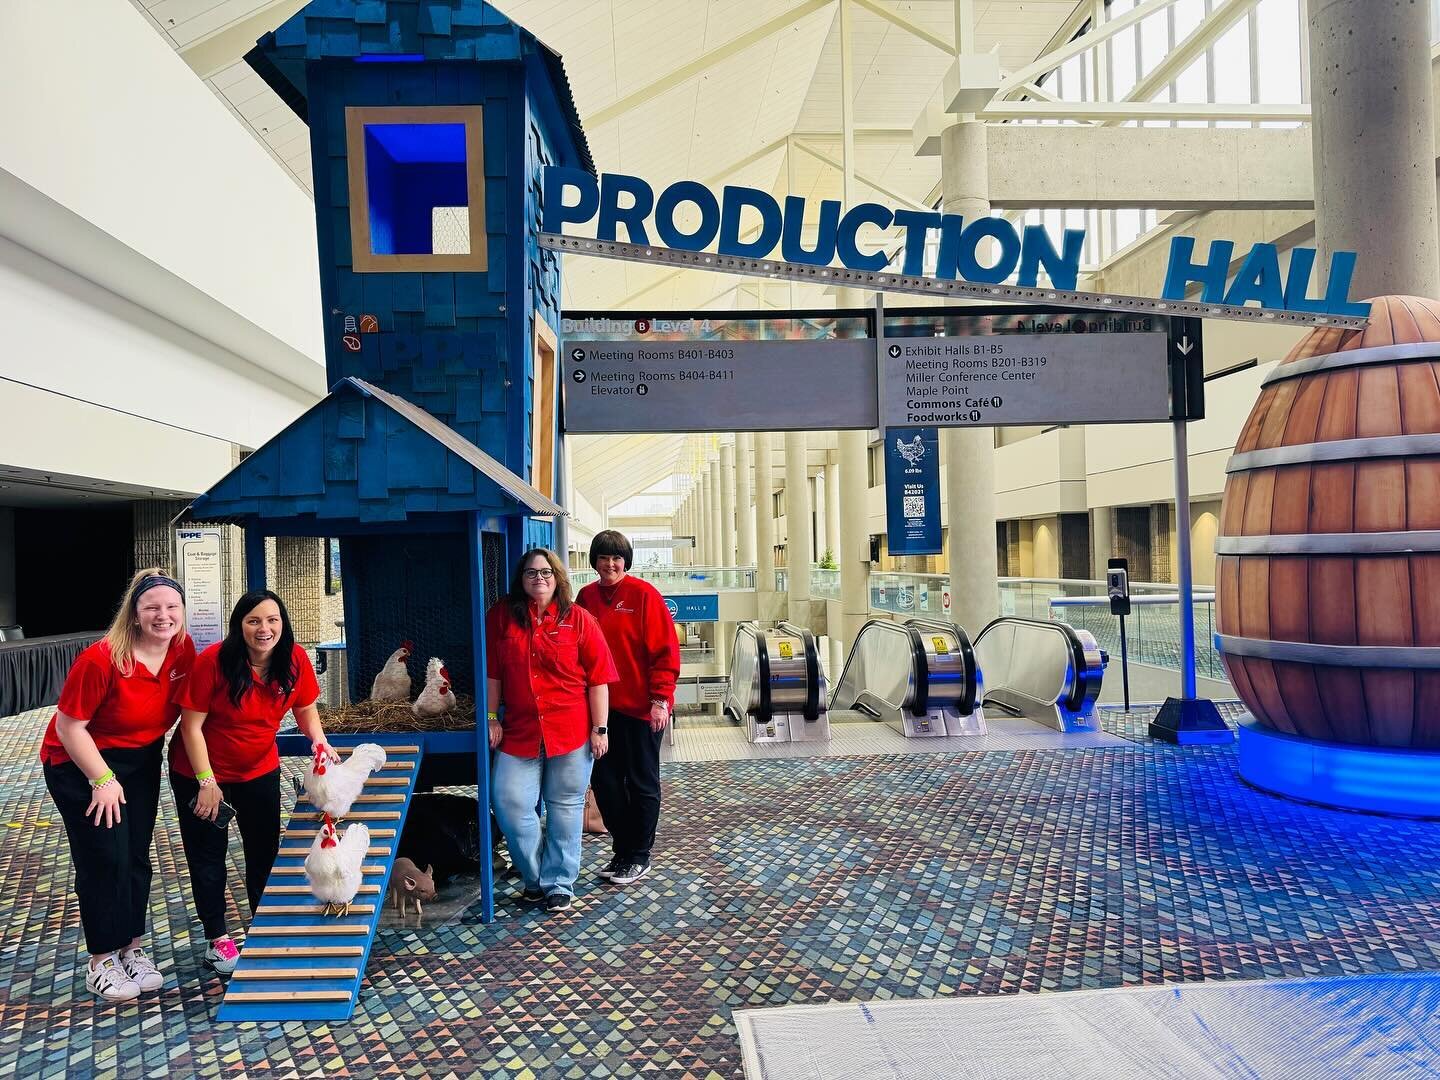 Some of the Momentum team members took a trip to Atlanta to see how the progress was at @ippeexpo 

#eventmanagement #tradeshow #installandismantle #momentummanagement #exhibition #tradeshows #tradeshowbooth #events #tradeshowdisplay #productlaunch #